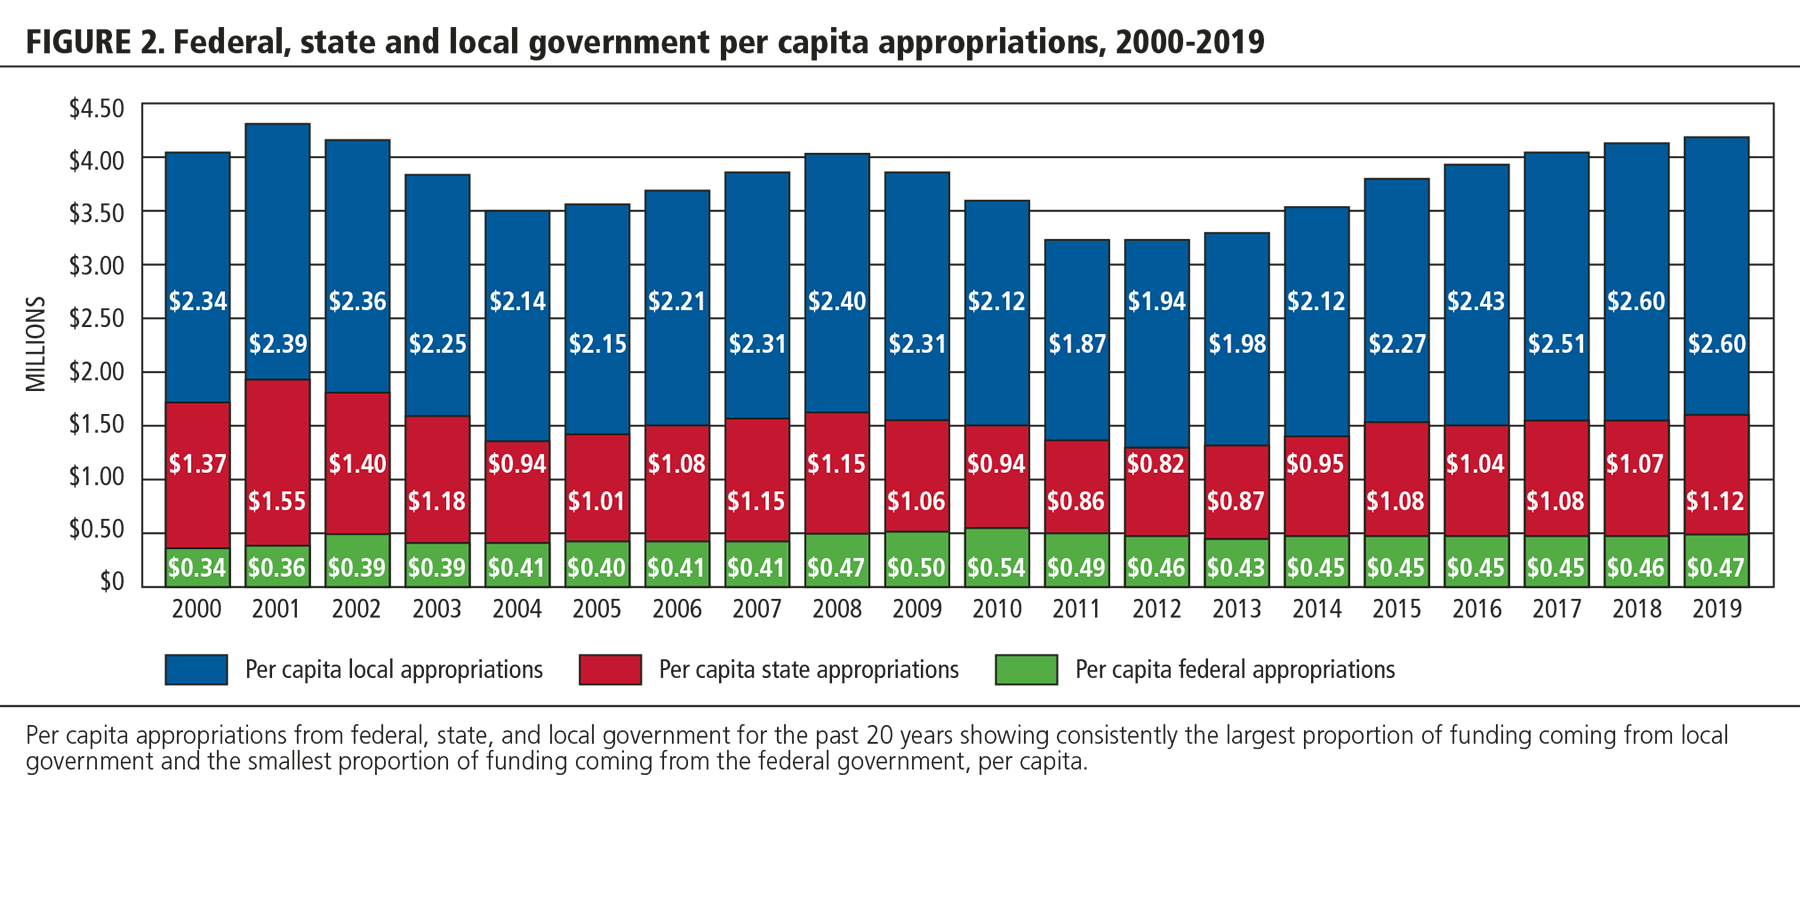 FIGURE 2. Federal, state, and local government per capita appropriations, 2000-2019.